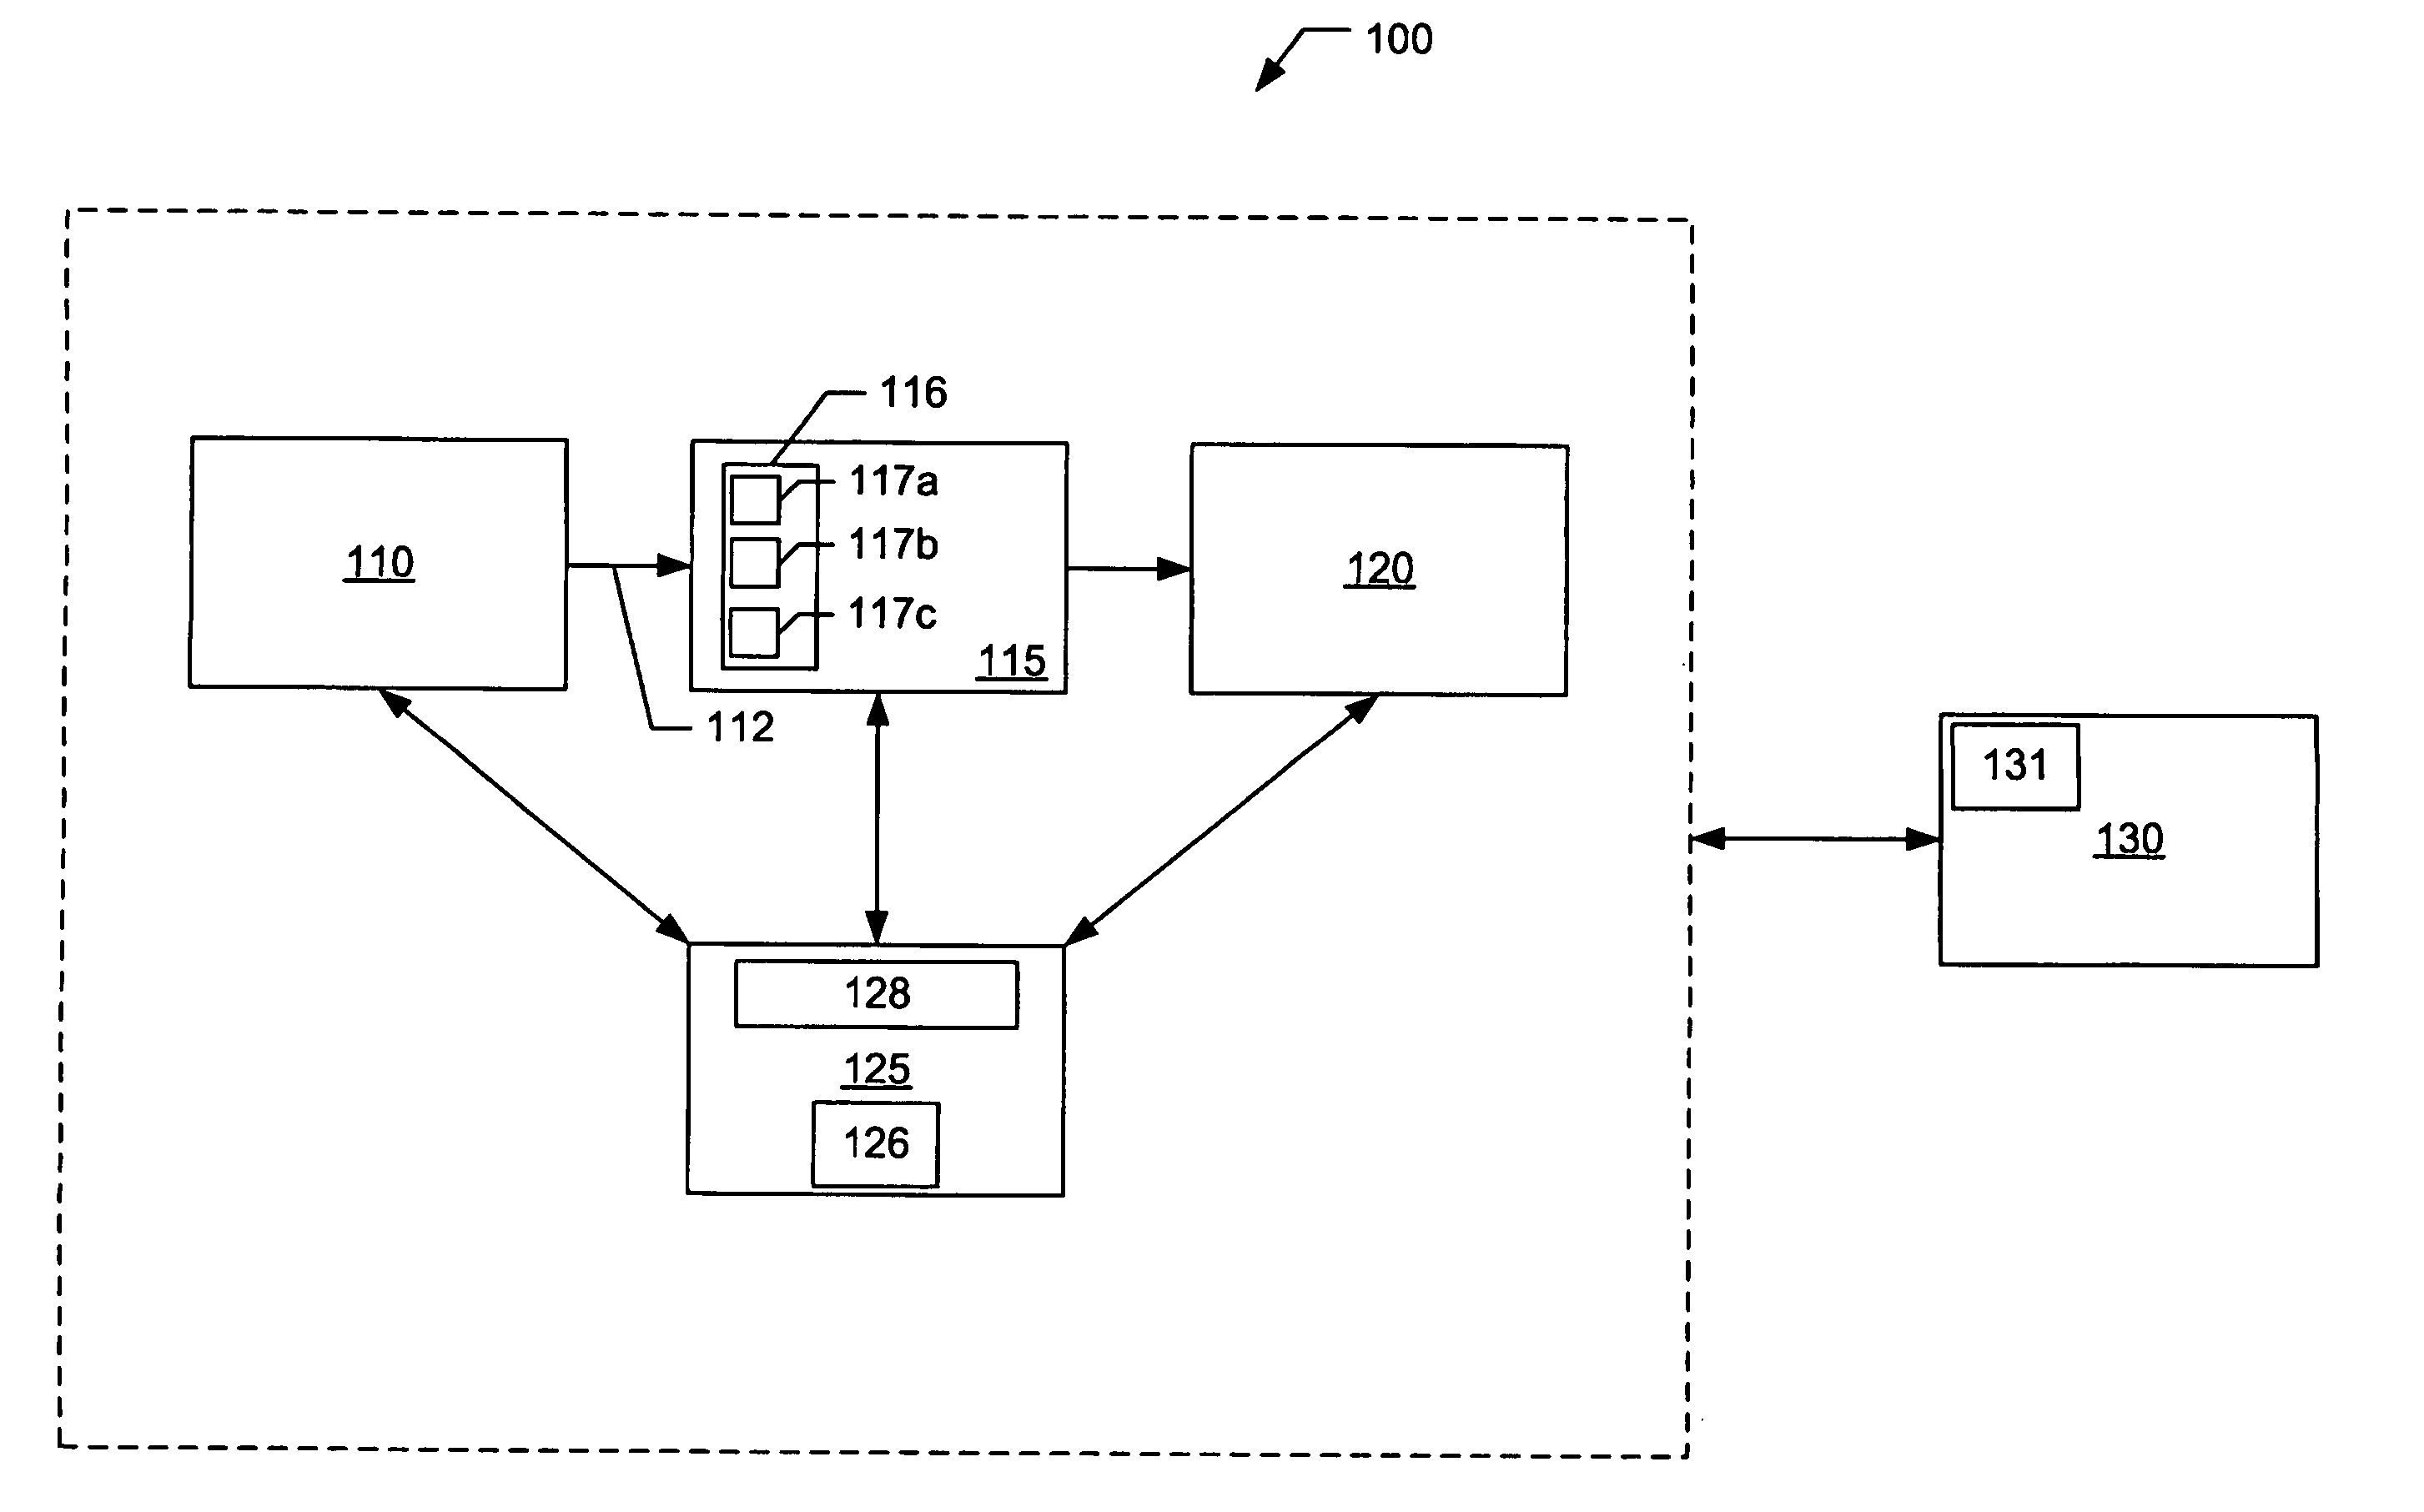 System for alternately pulsing energy of accelerated electrons bombarding a conversion target